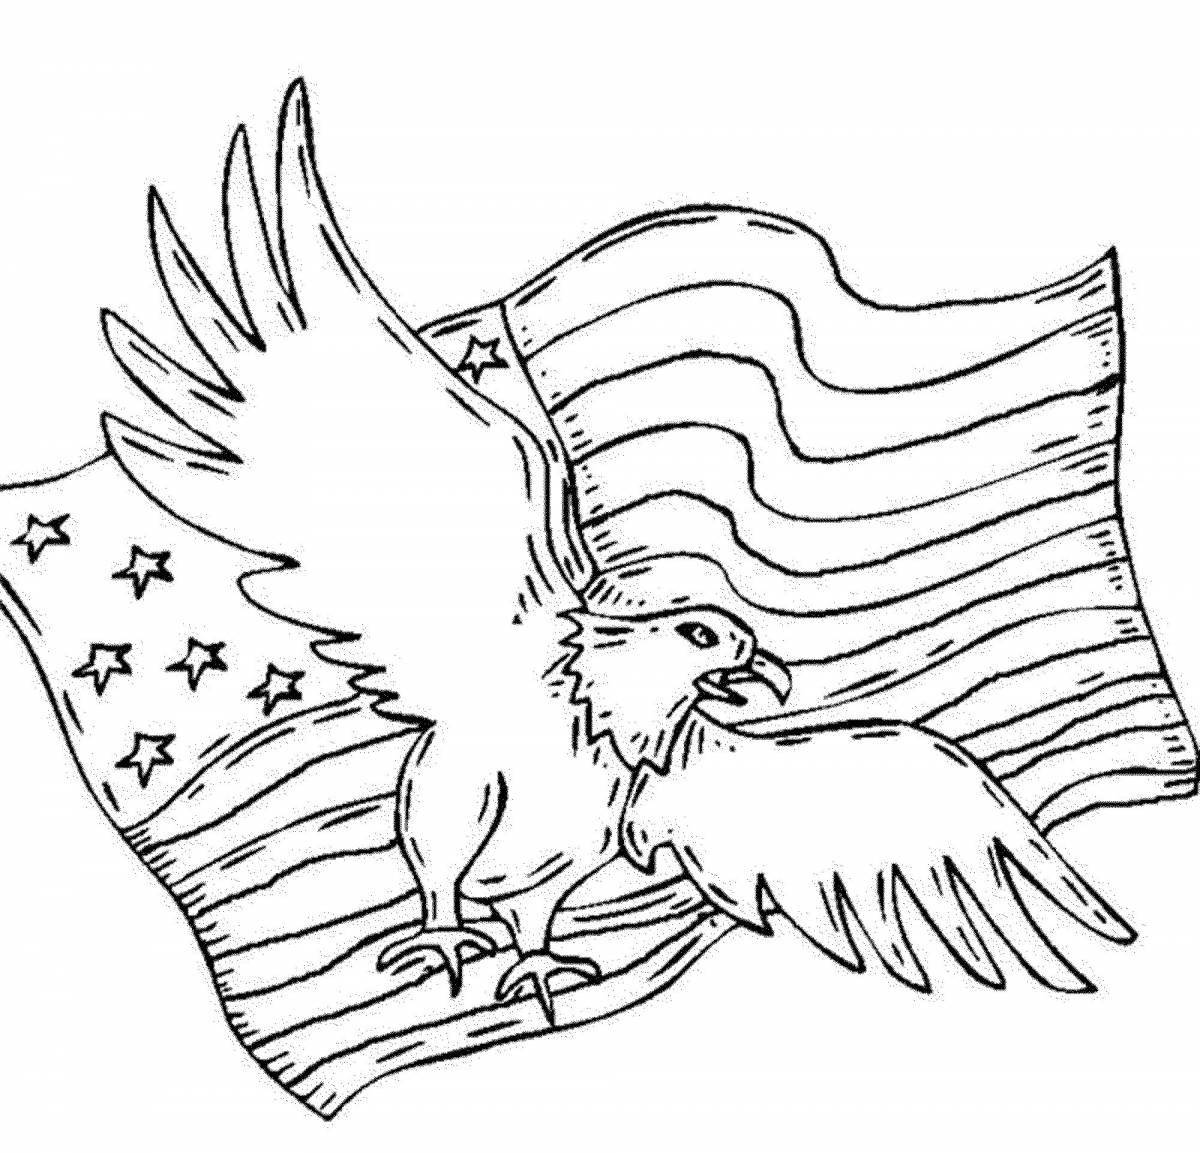 Monumental coat of arms of the city of eagle